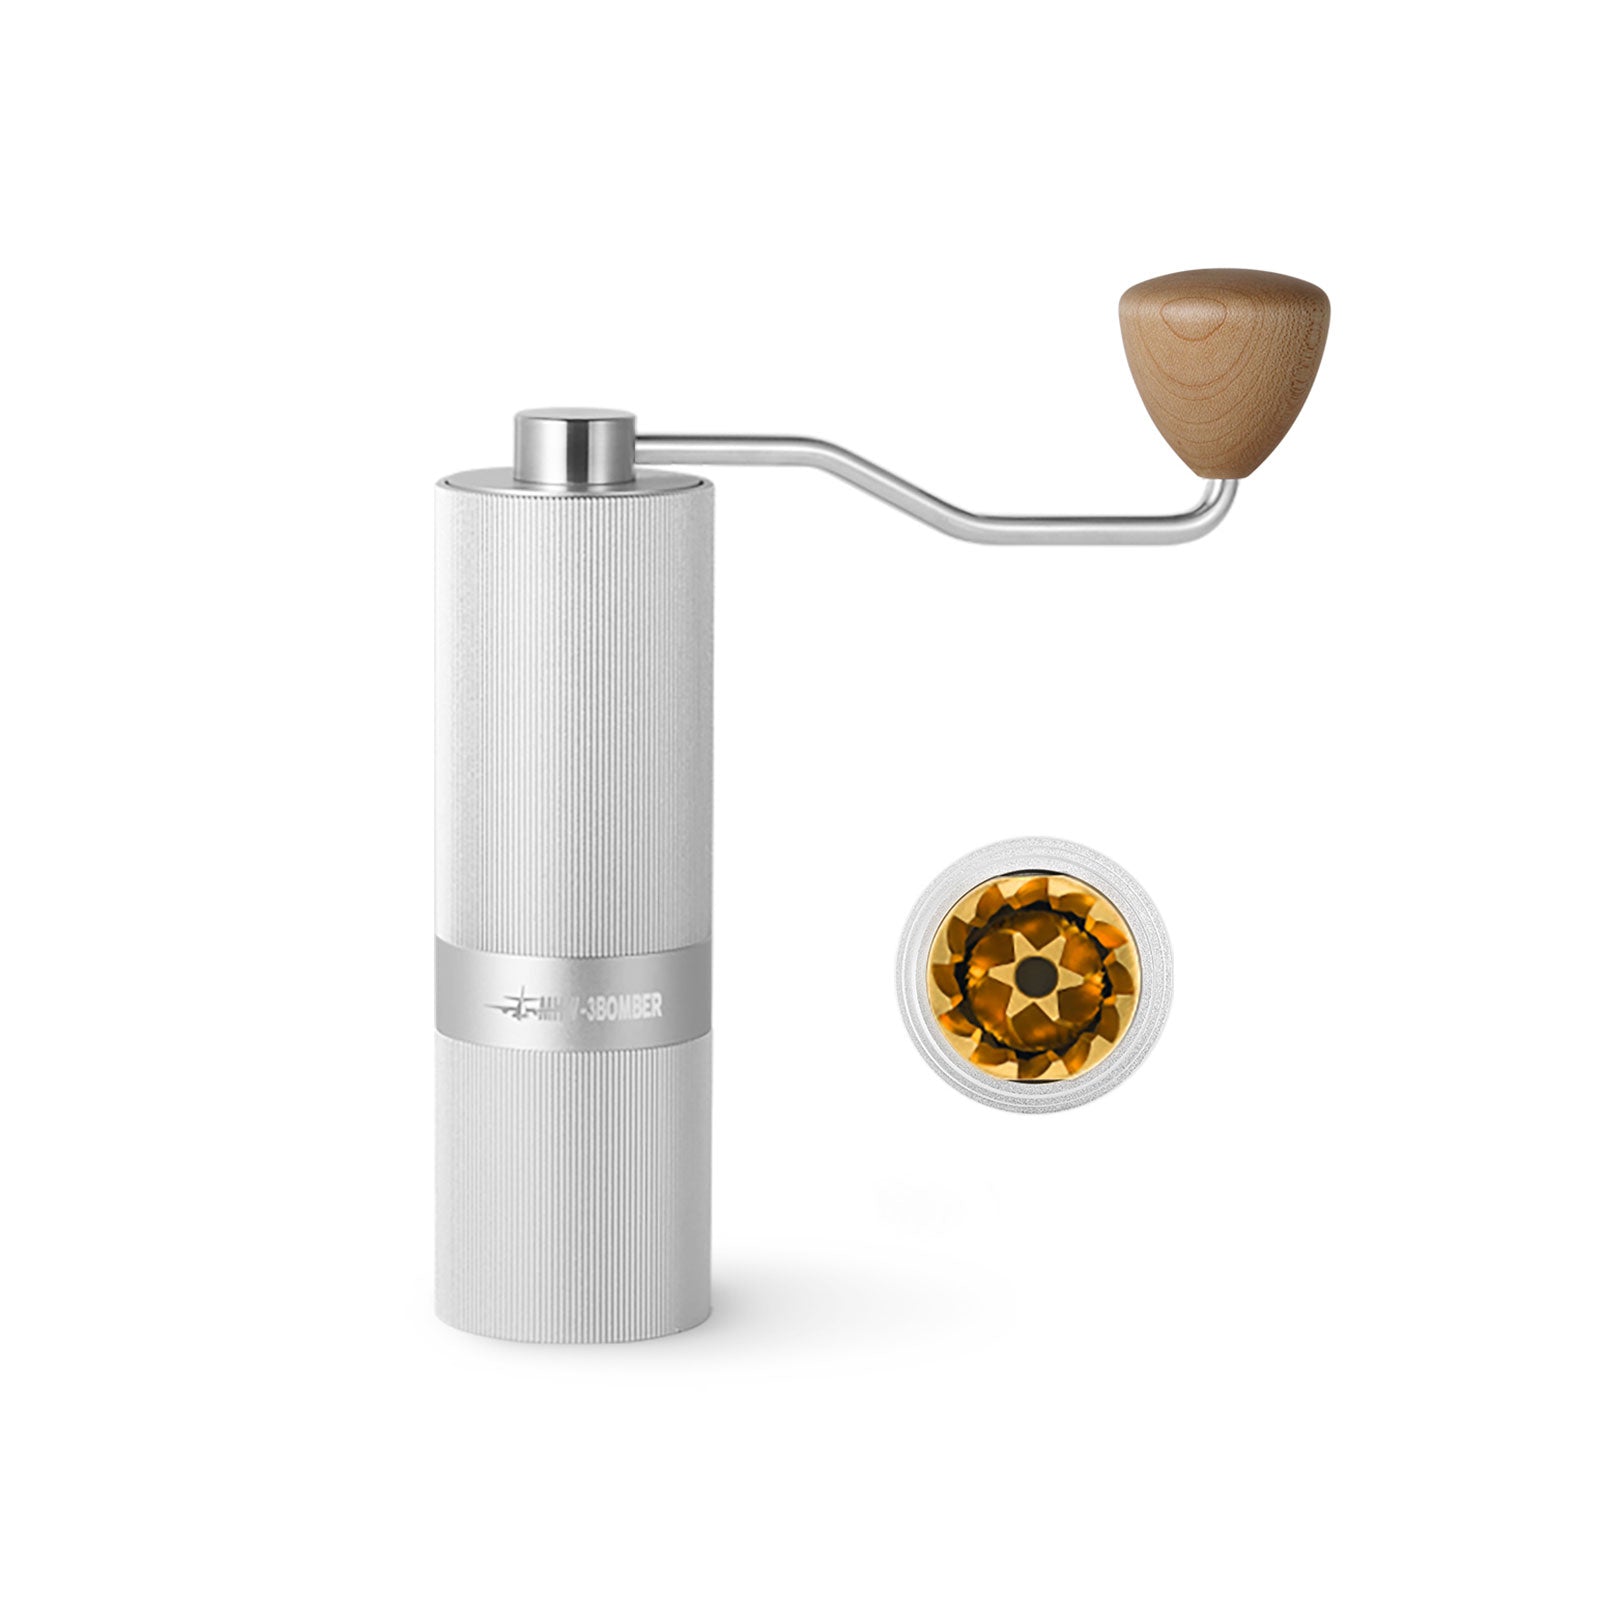 MHW-3BOMBER M1 Manual Coffee Grinder